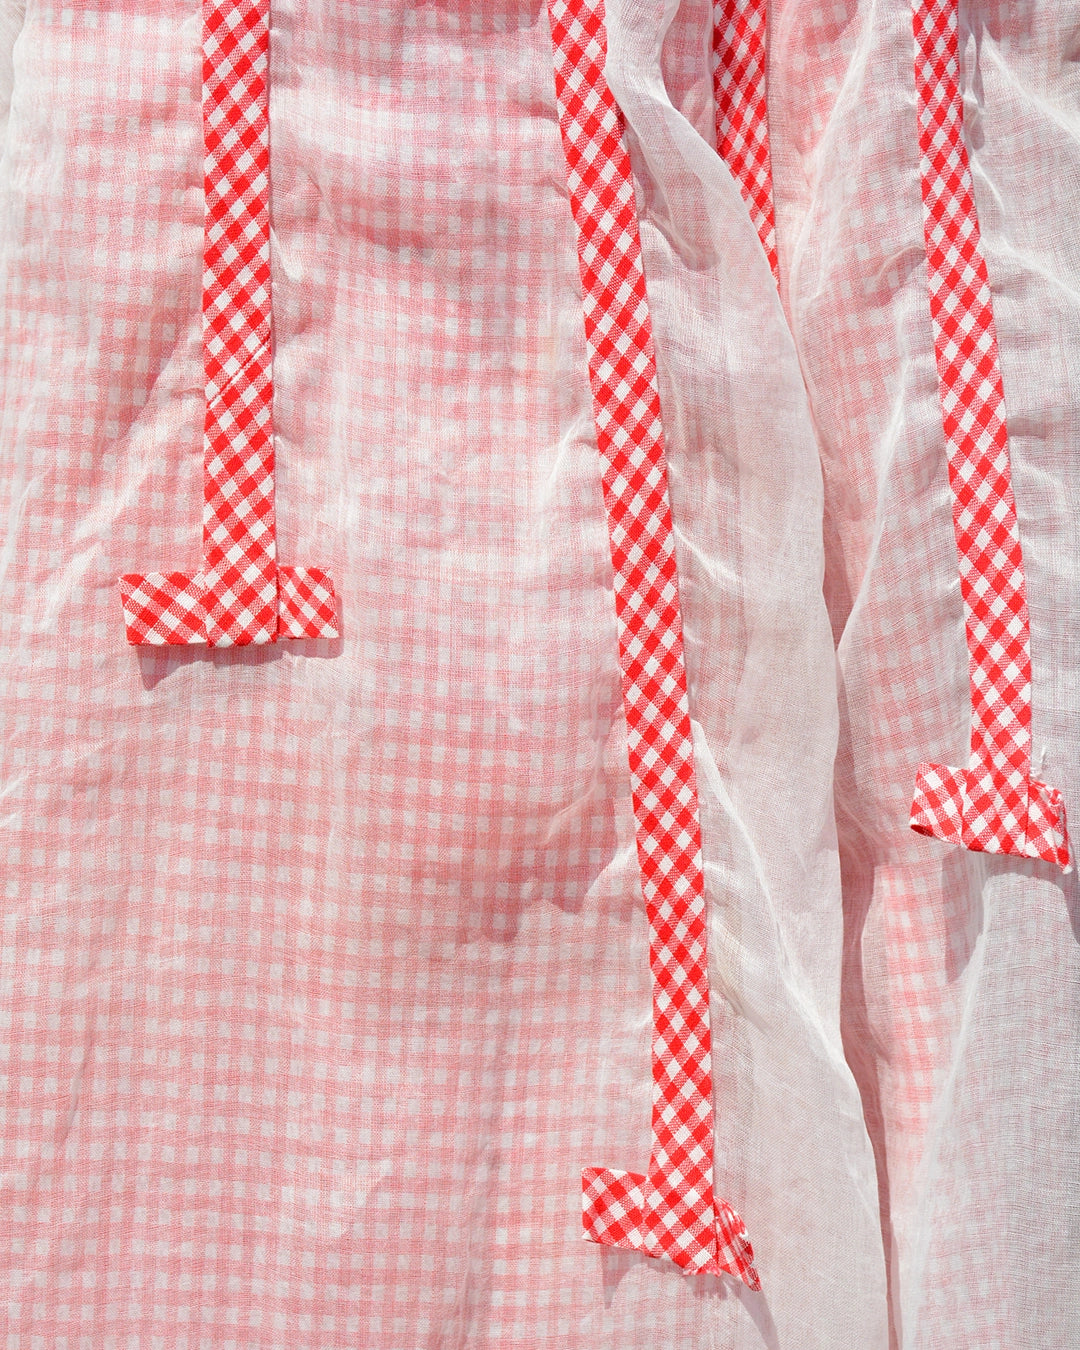 Vintage 1950s Gingham Fit and Flare Dress with Organdy Overlay